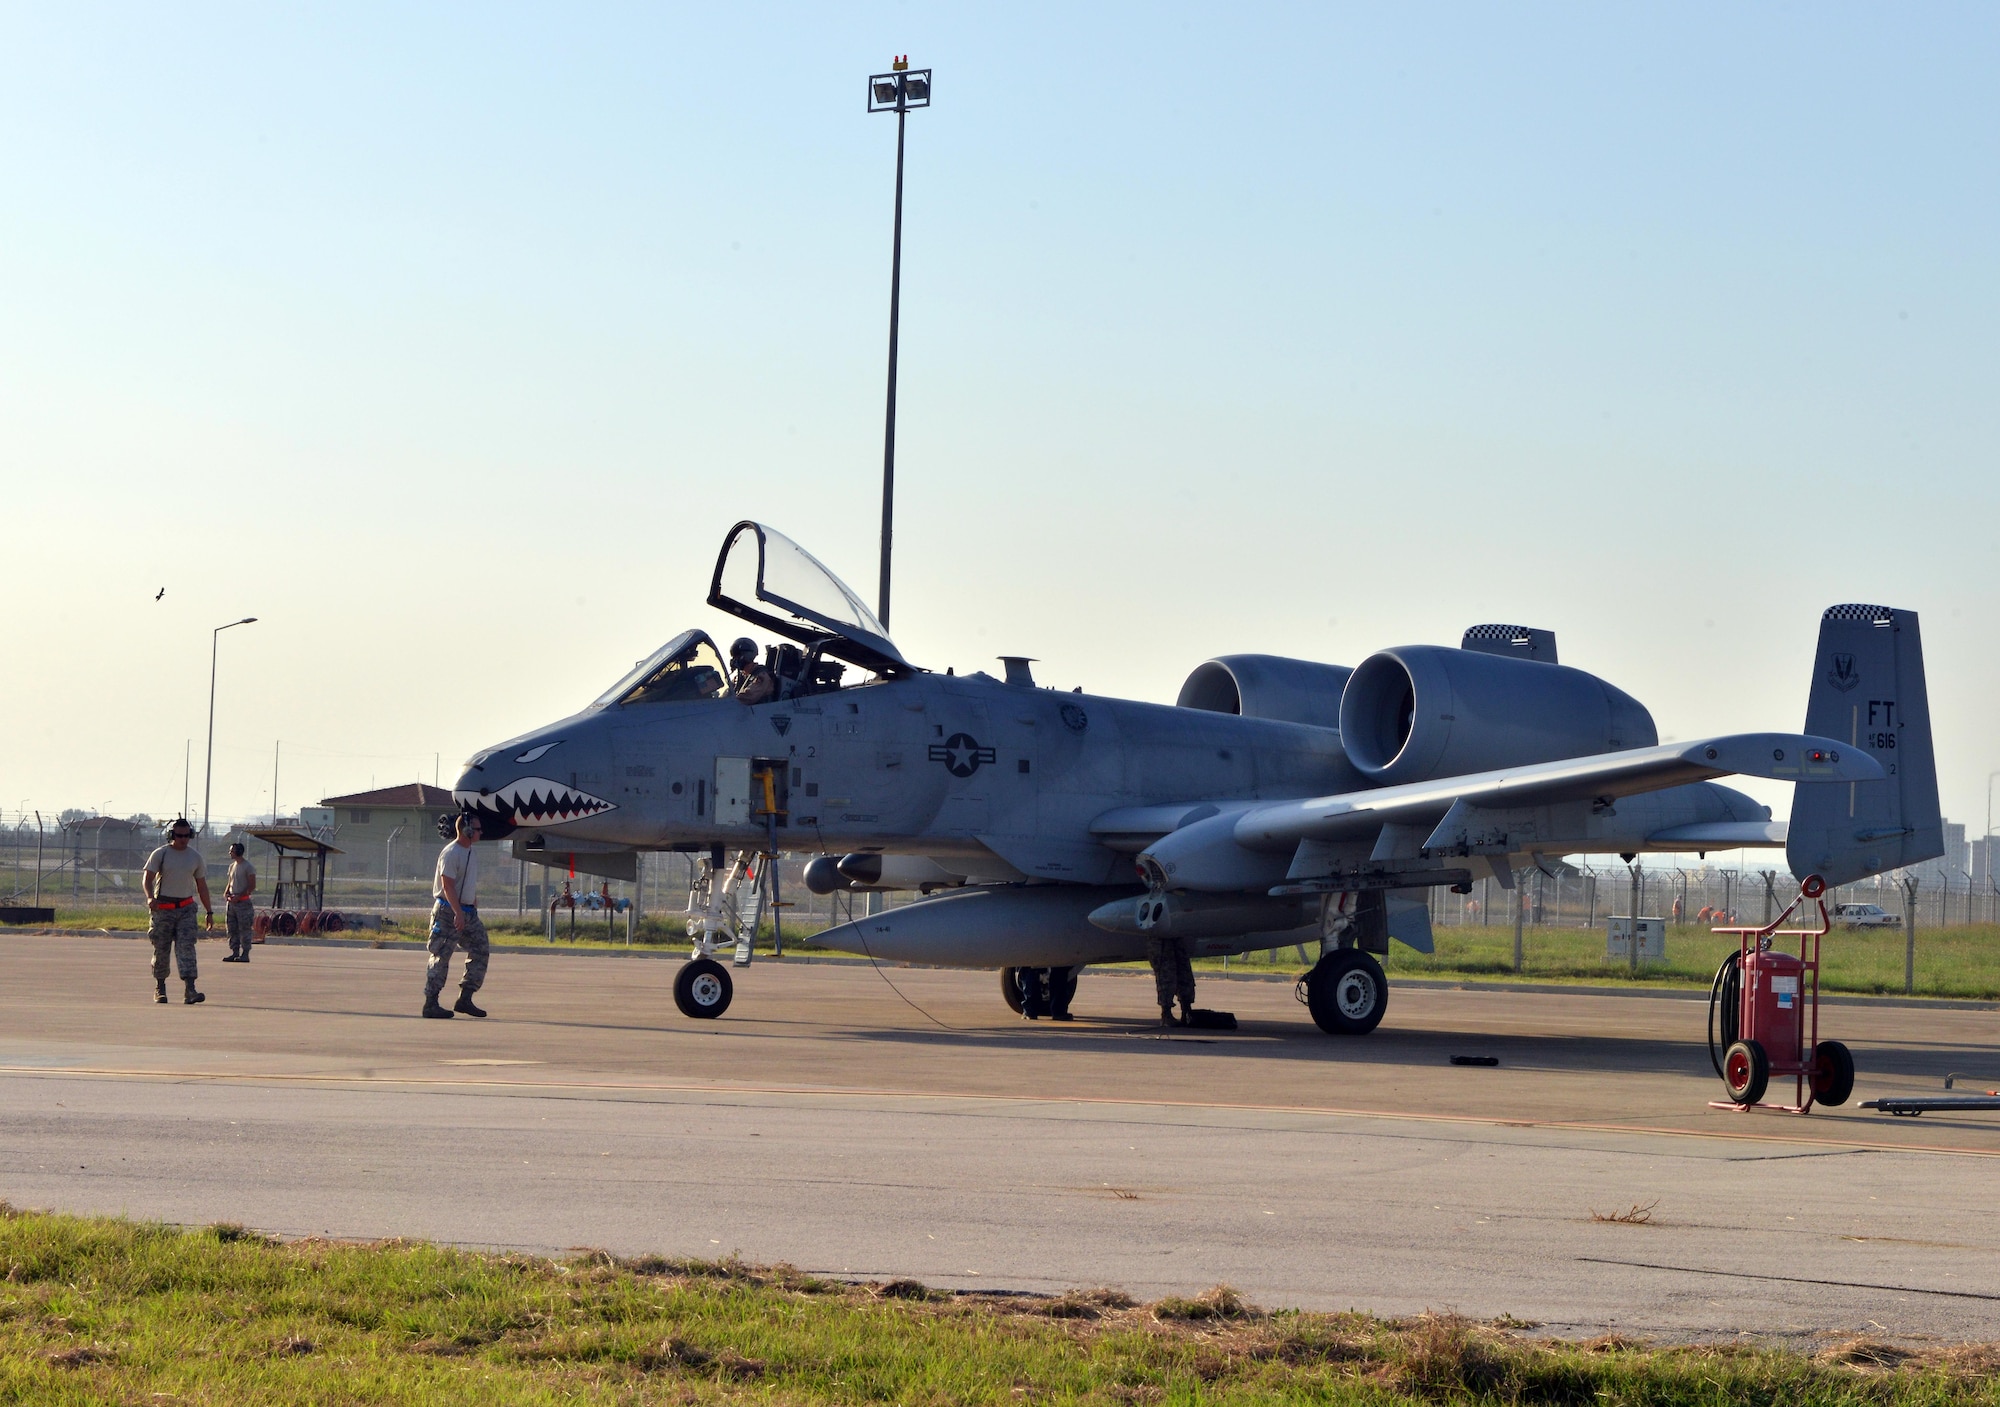 An aircrew prepares to unload an A-10C Thunderbolt II attack aircraft at Incirlik Air Base, Turkey Oct. 15, 2015. The aircraft is deployed to Incirlik AB in support of Operation Inherent Resolve. The U.S. and Turkey, as members of the 60-plus nation coalition, are committed to the fight against ISIL in pursuit of peace and stability in the region. (U.S. Air Force photo by  Senior Airman Michael Battles/Released)